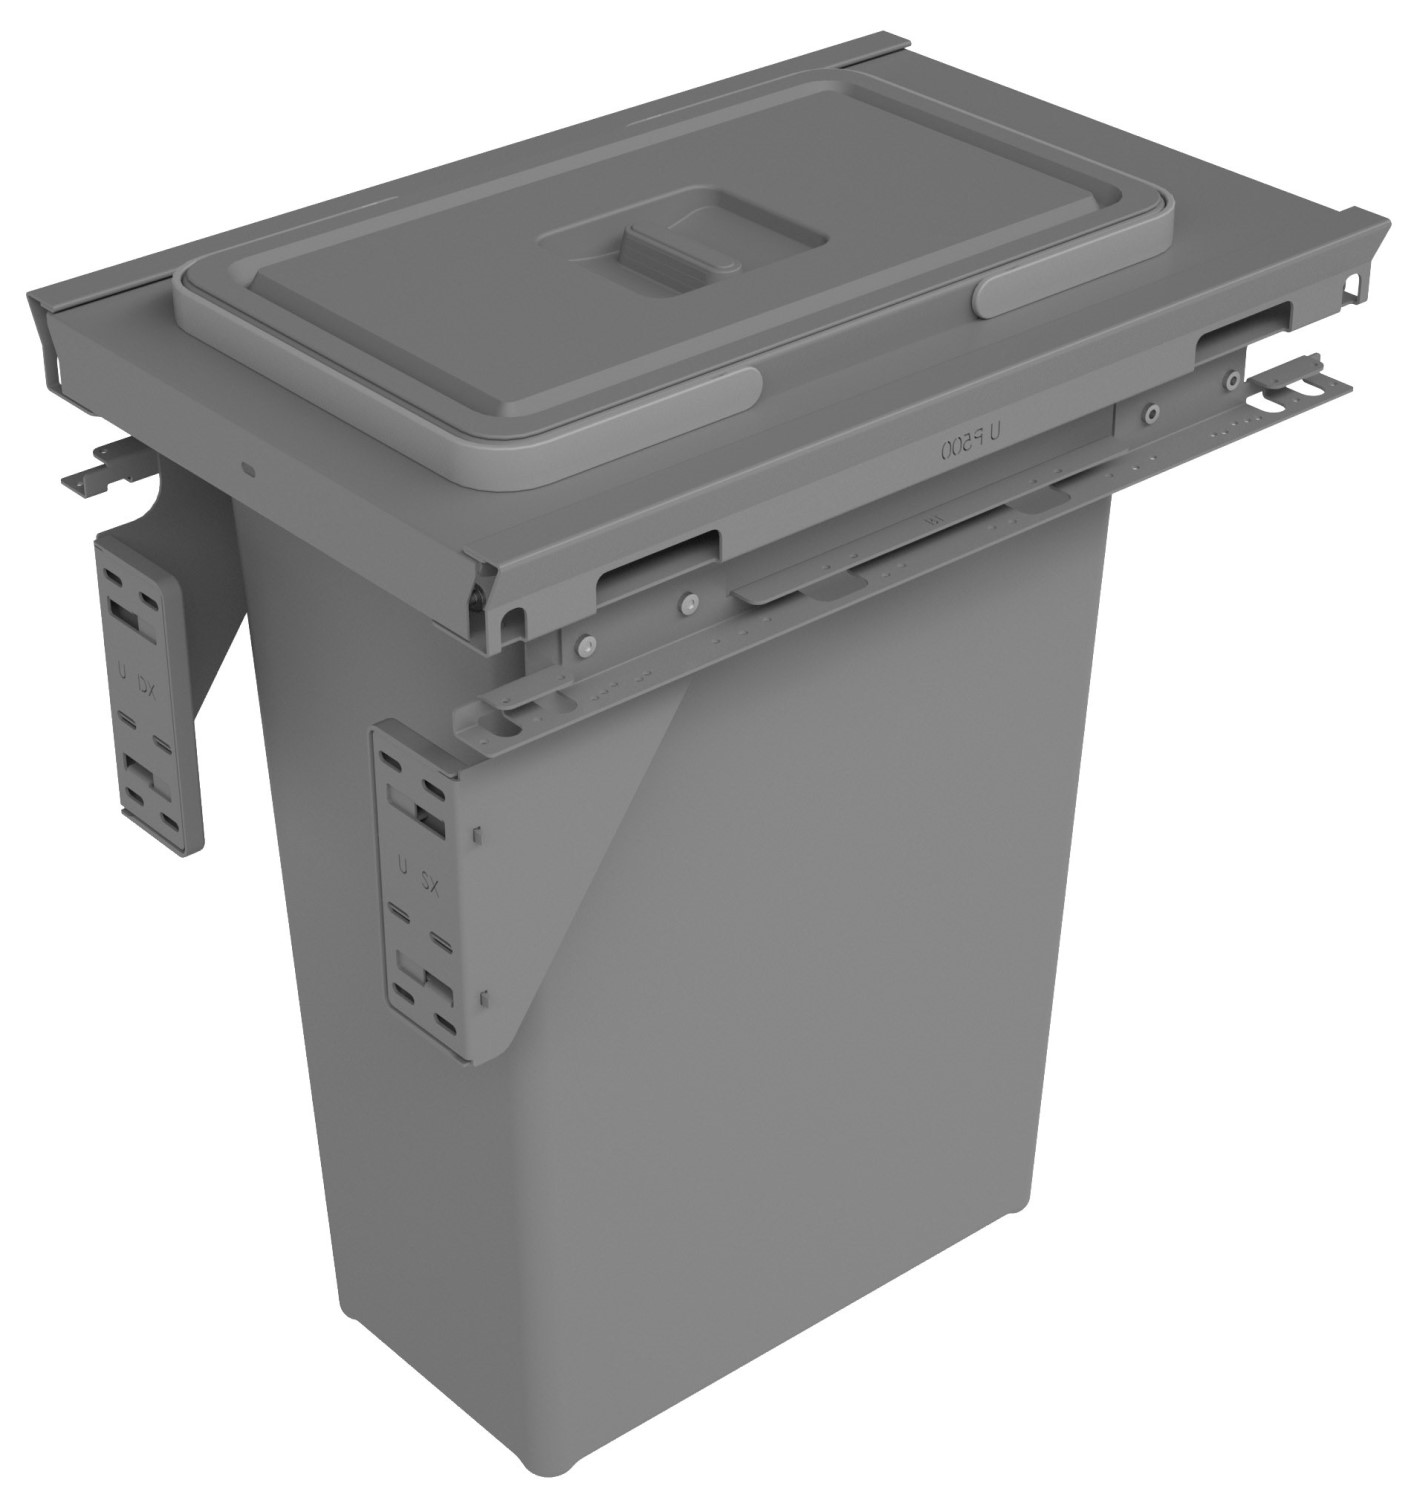 Sige pull-out waste bin, 1 bin 35L anthracite